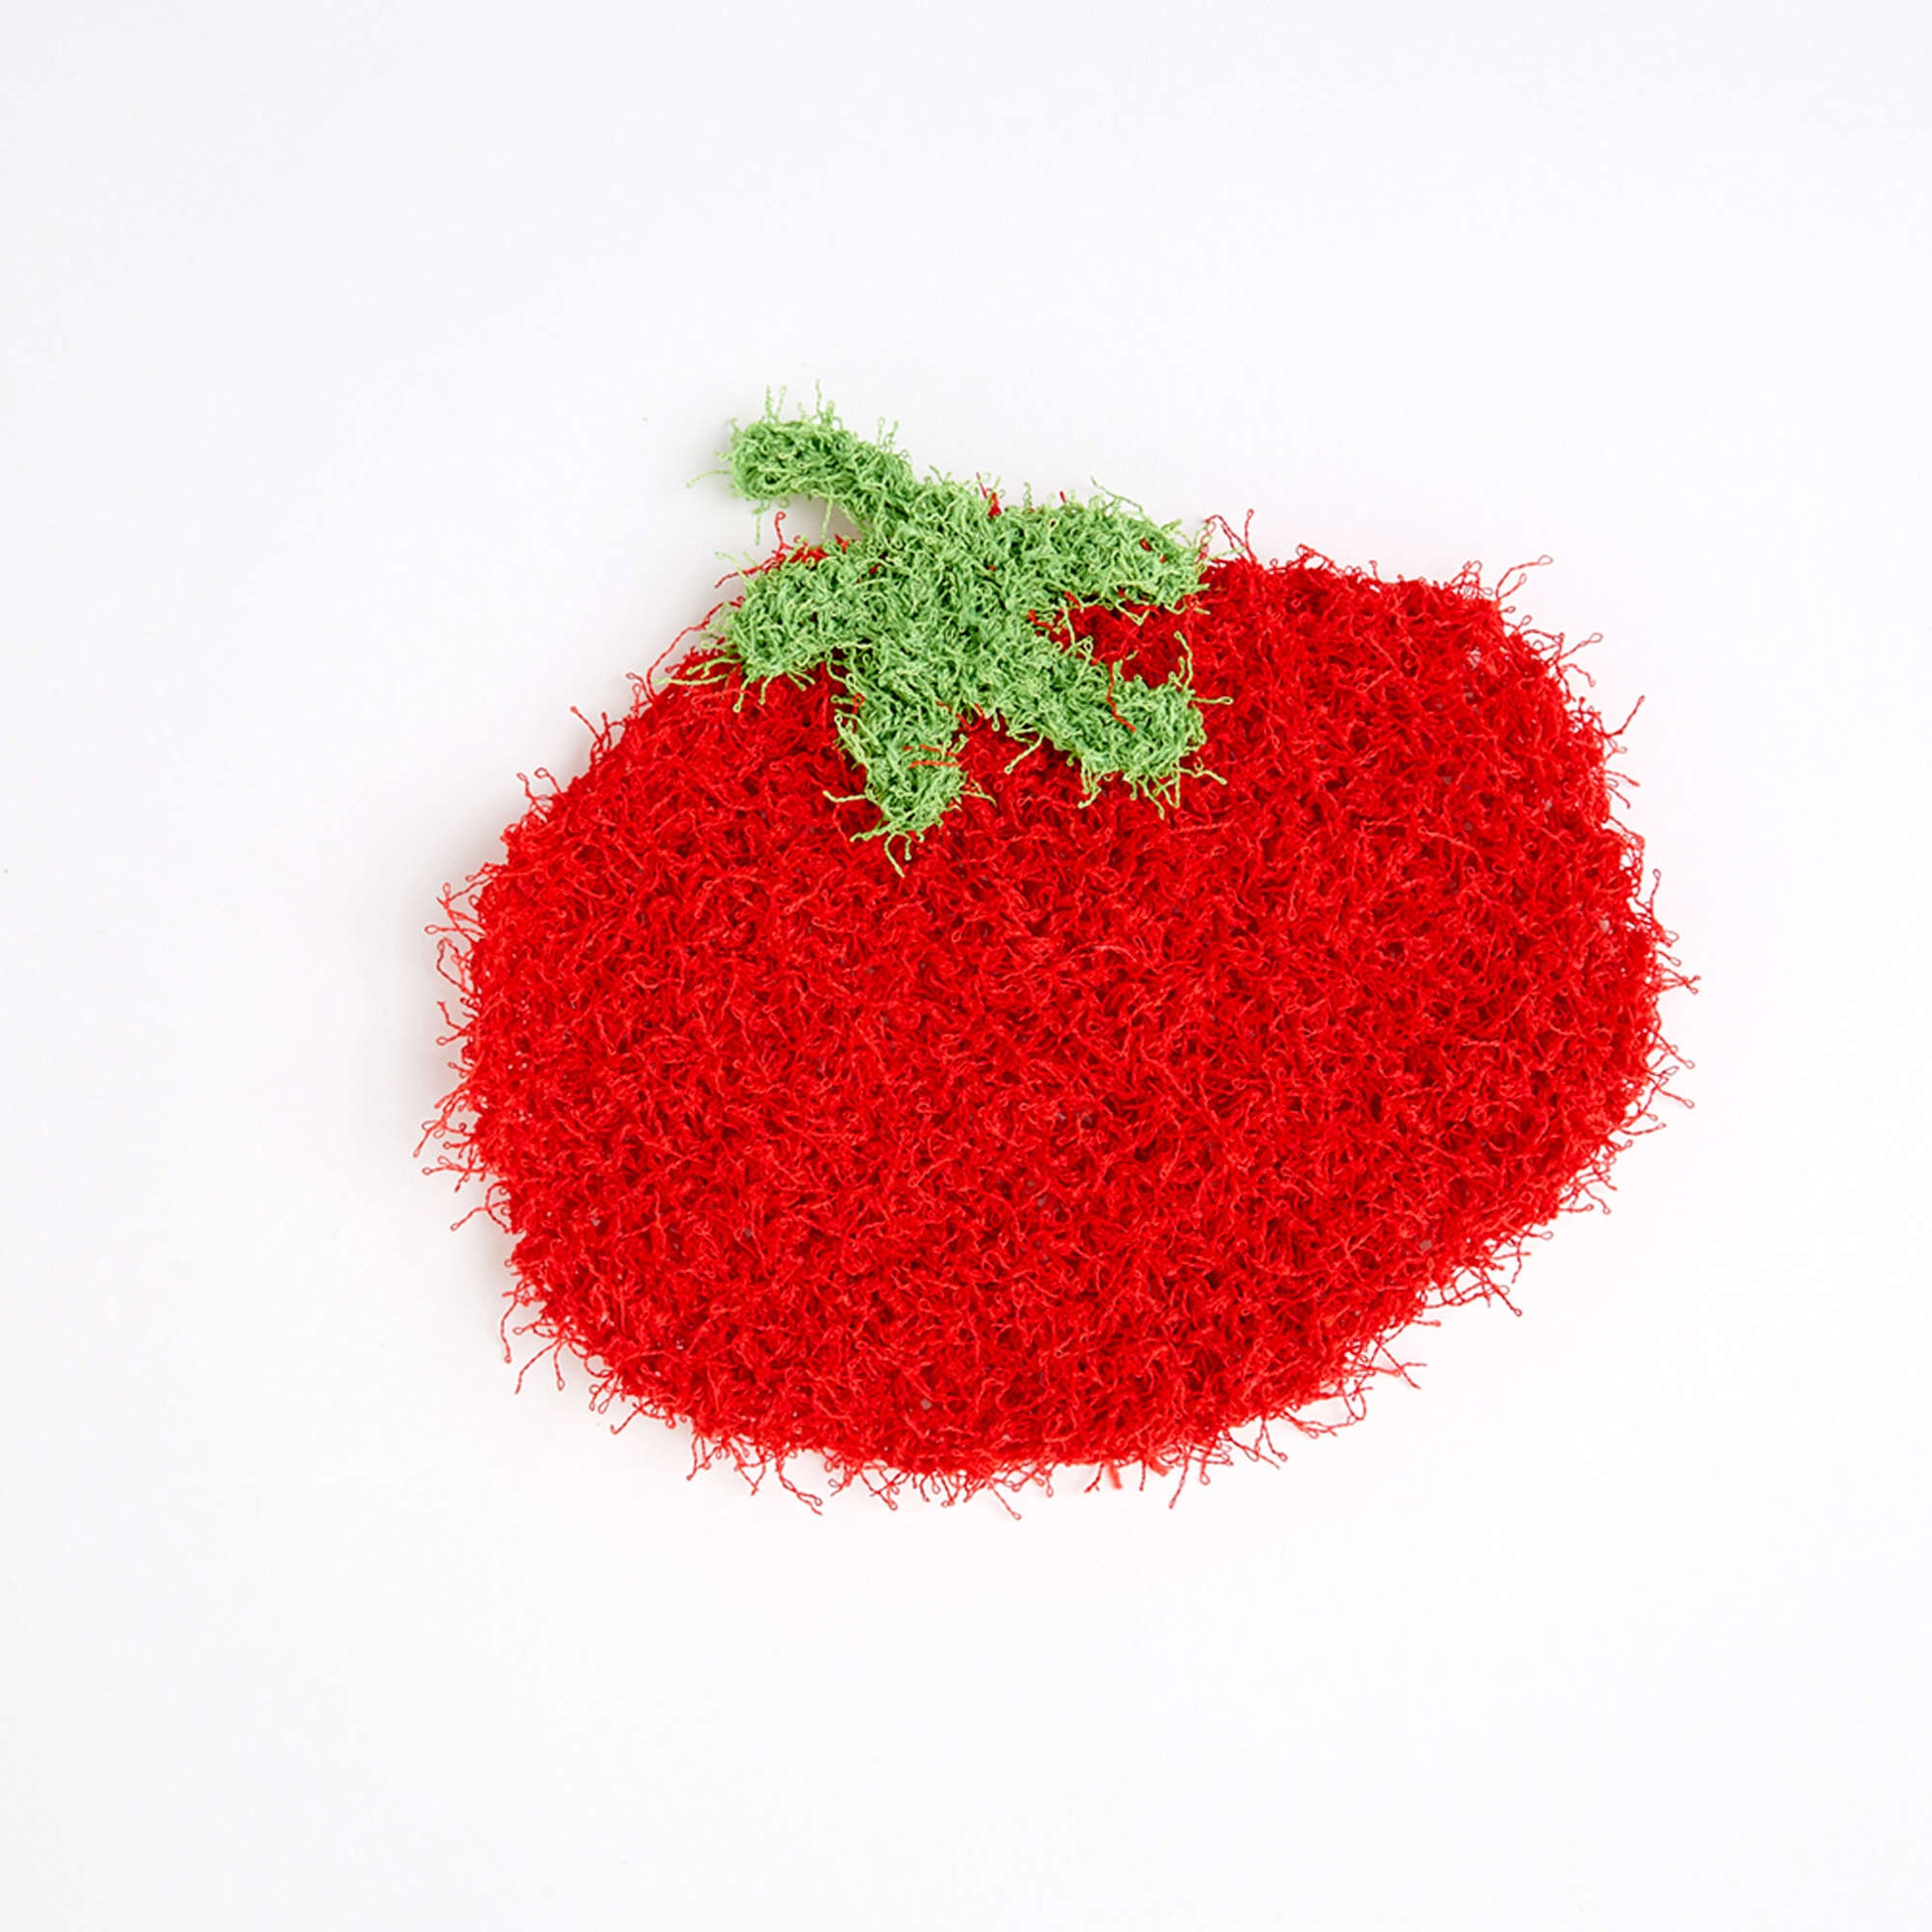 Free Red Heart Knit Tomato Scrubby Pattern